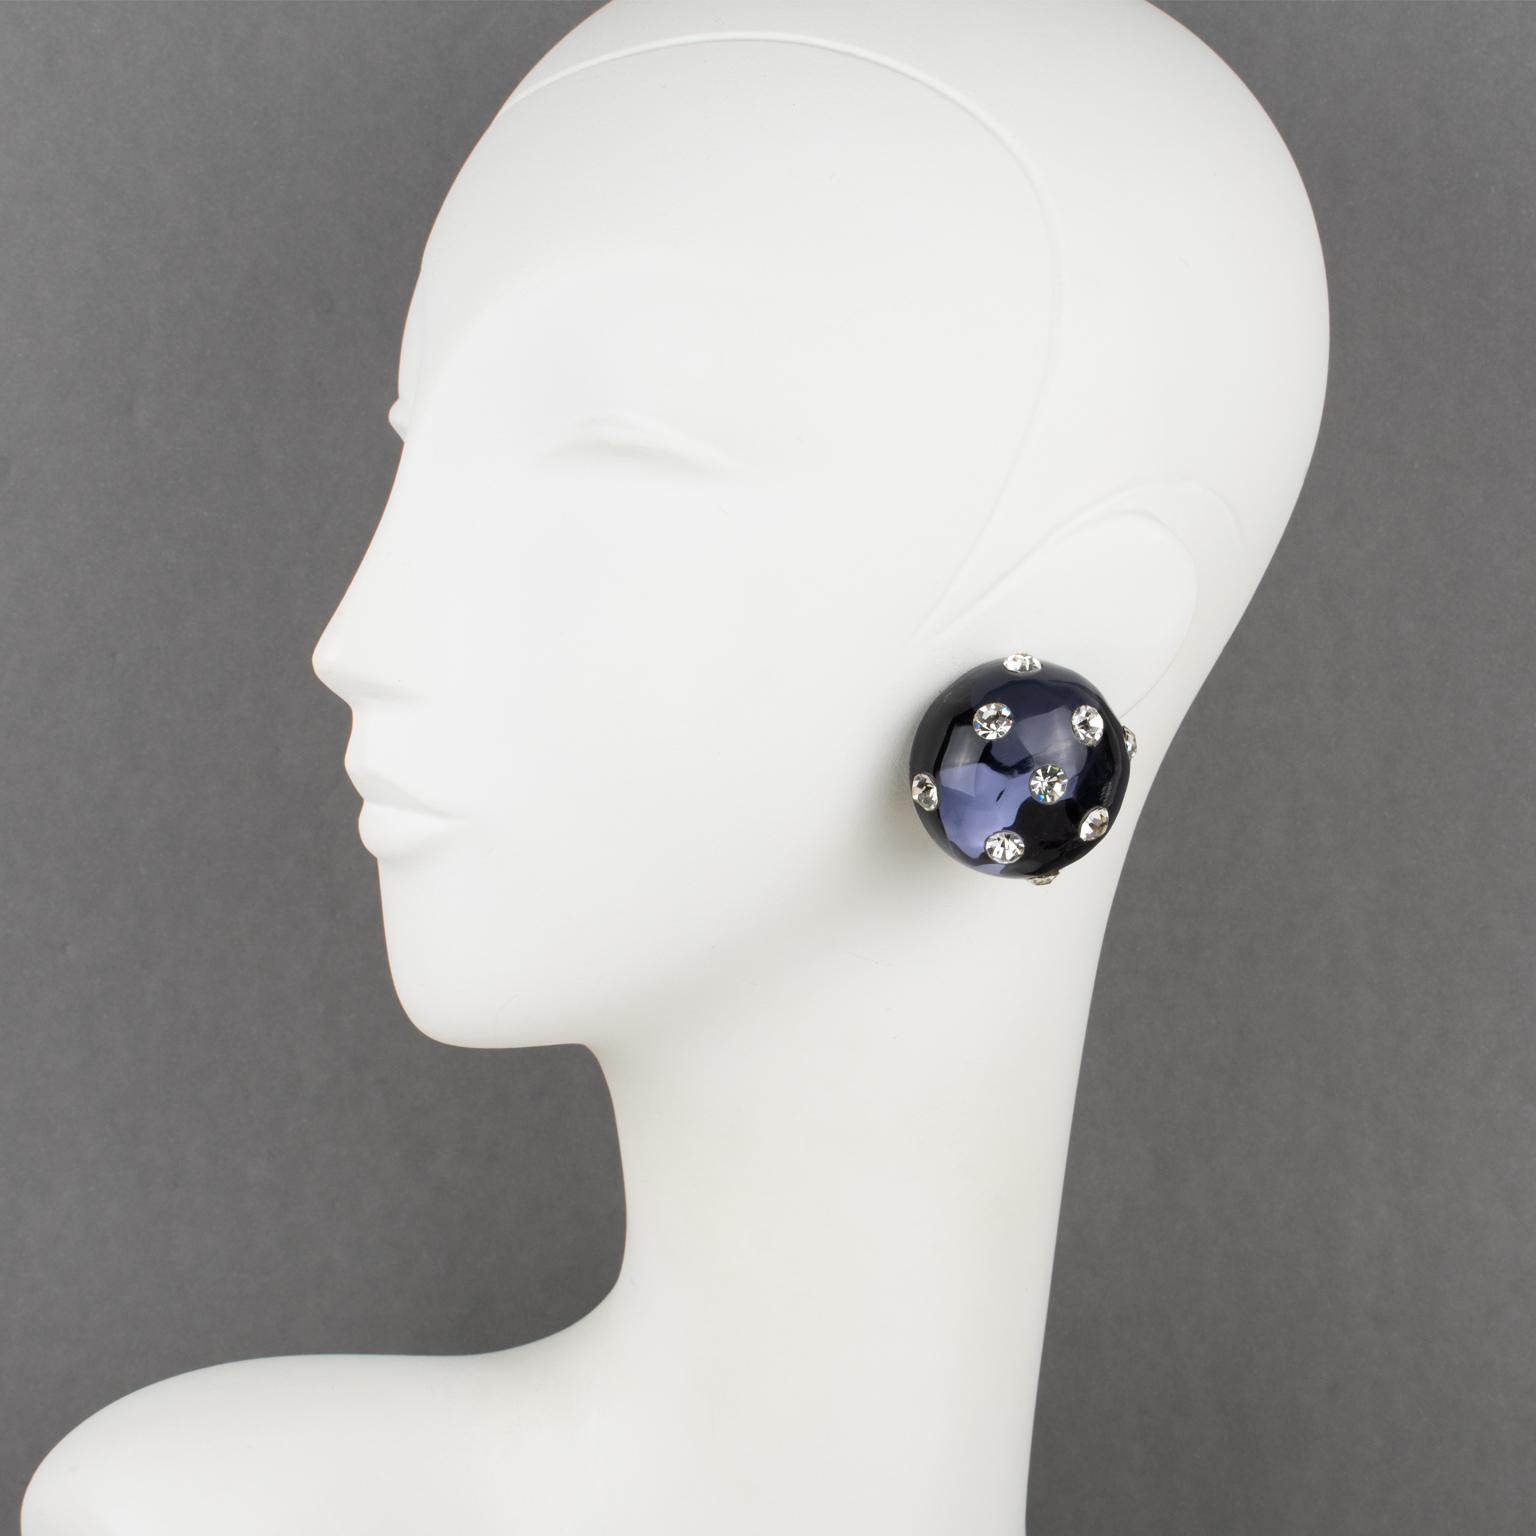 Beautiful Lucite clip-on earrings designed by Harriet Bauknight for Kaso. Features a dimensional carved round domed shape in navy blue color, all paved with white crystal rhinestones.
The Kaso paper sticker was removed, but the gray background and